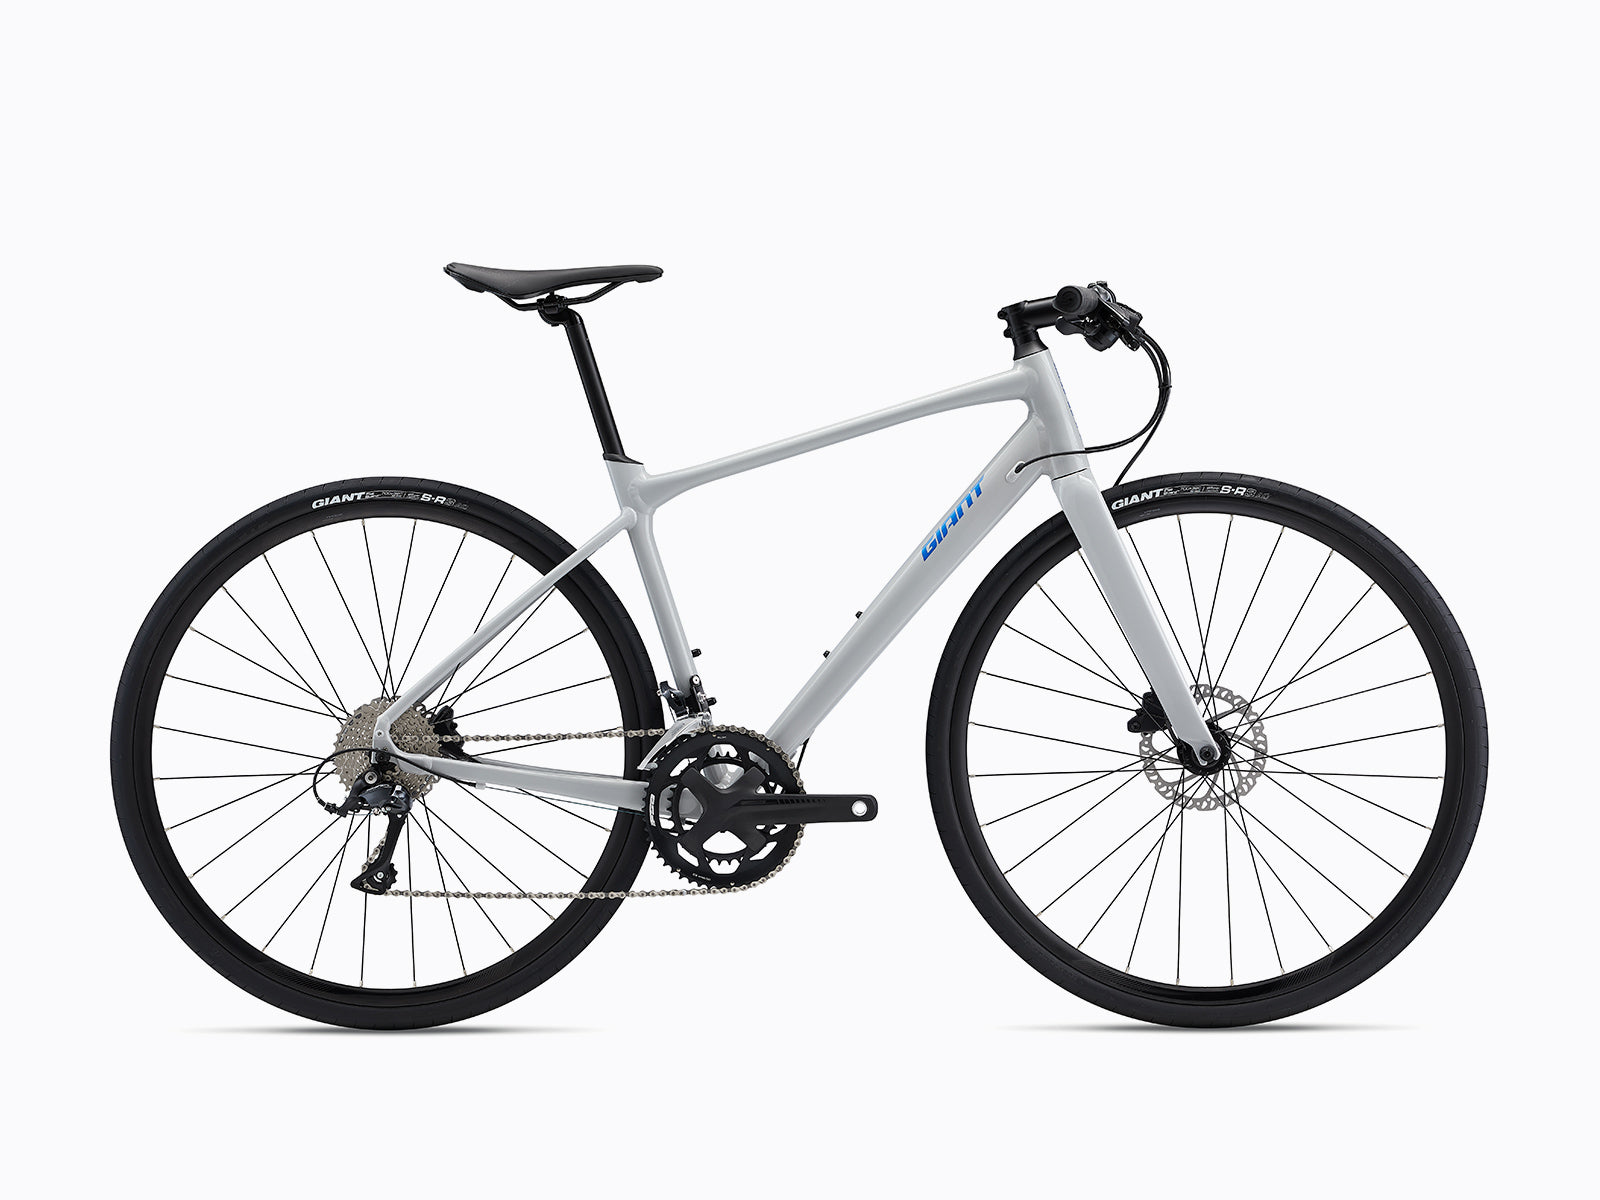 image features a white coloured giant fastroad sl 2, a fitness road bike sold by giant bicycles australia